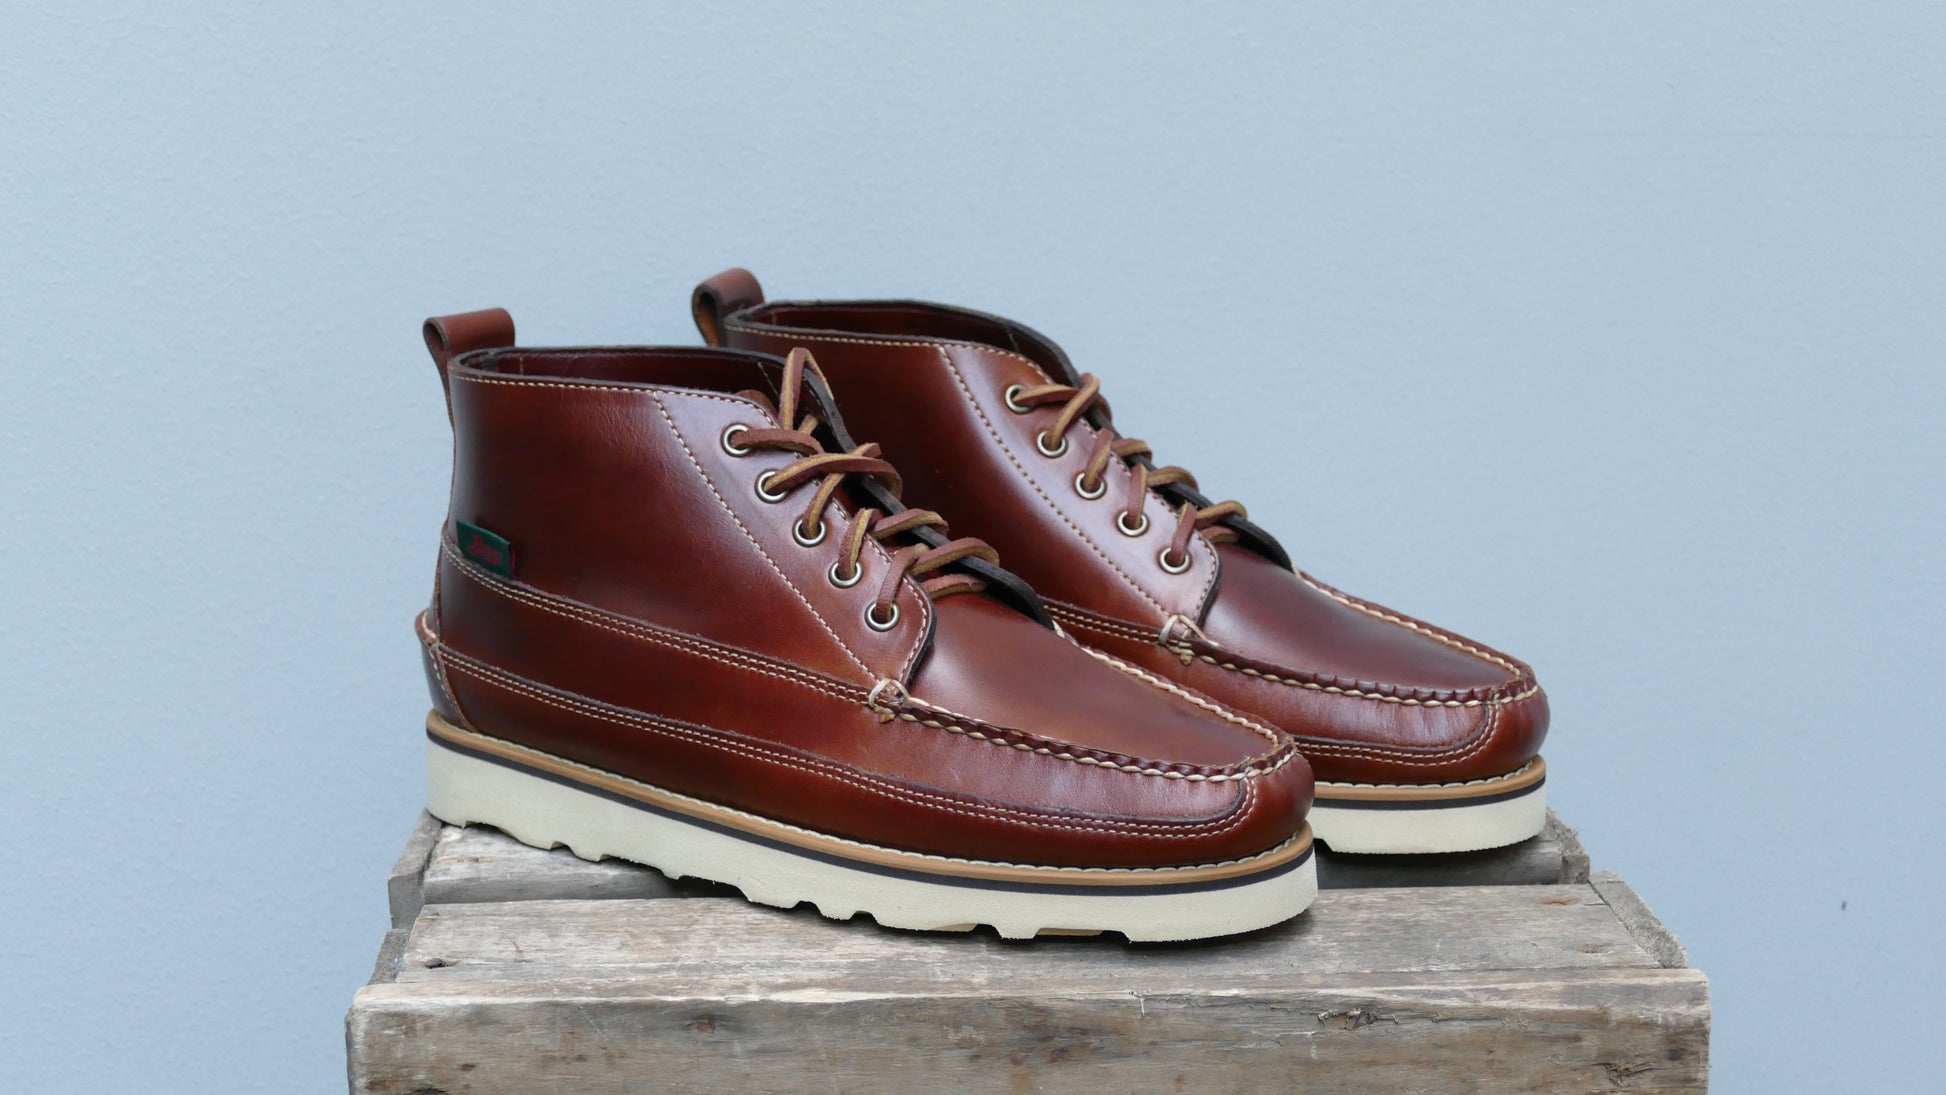 G.H.Bass Camp Moc Ranger III - Dark Brown Pull Up Leather Boots